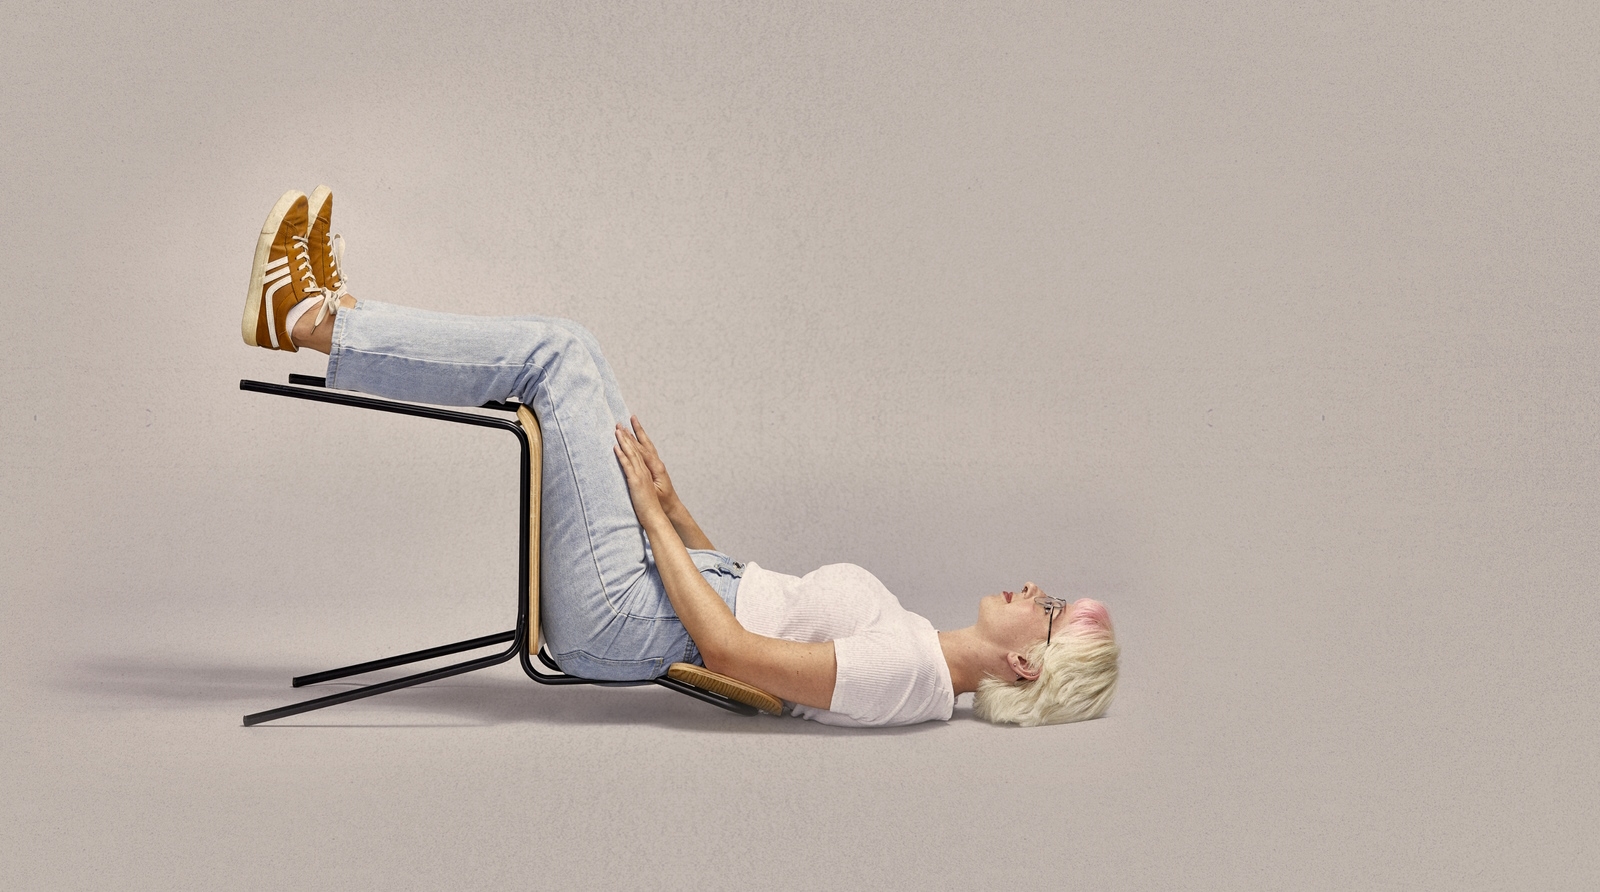 Lady with blonde hair sitting on a chair while lying on the ground